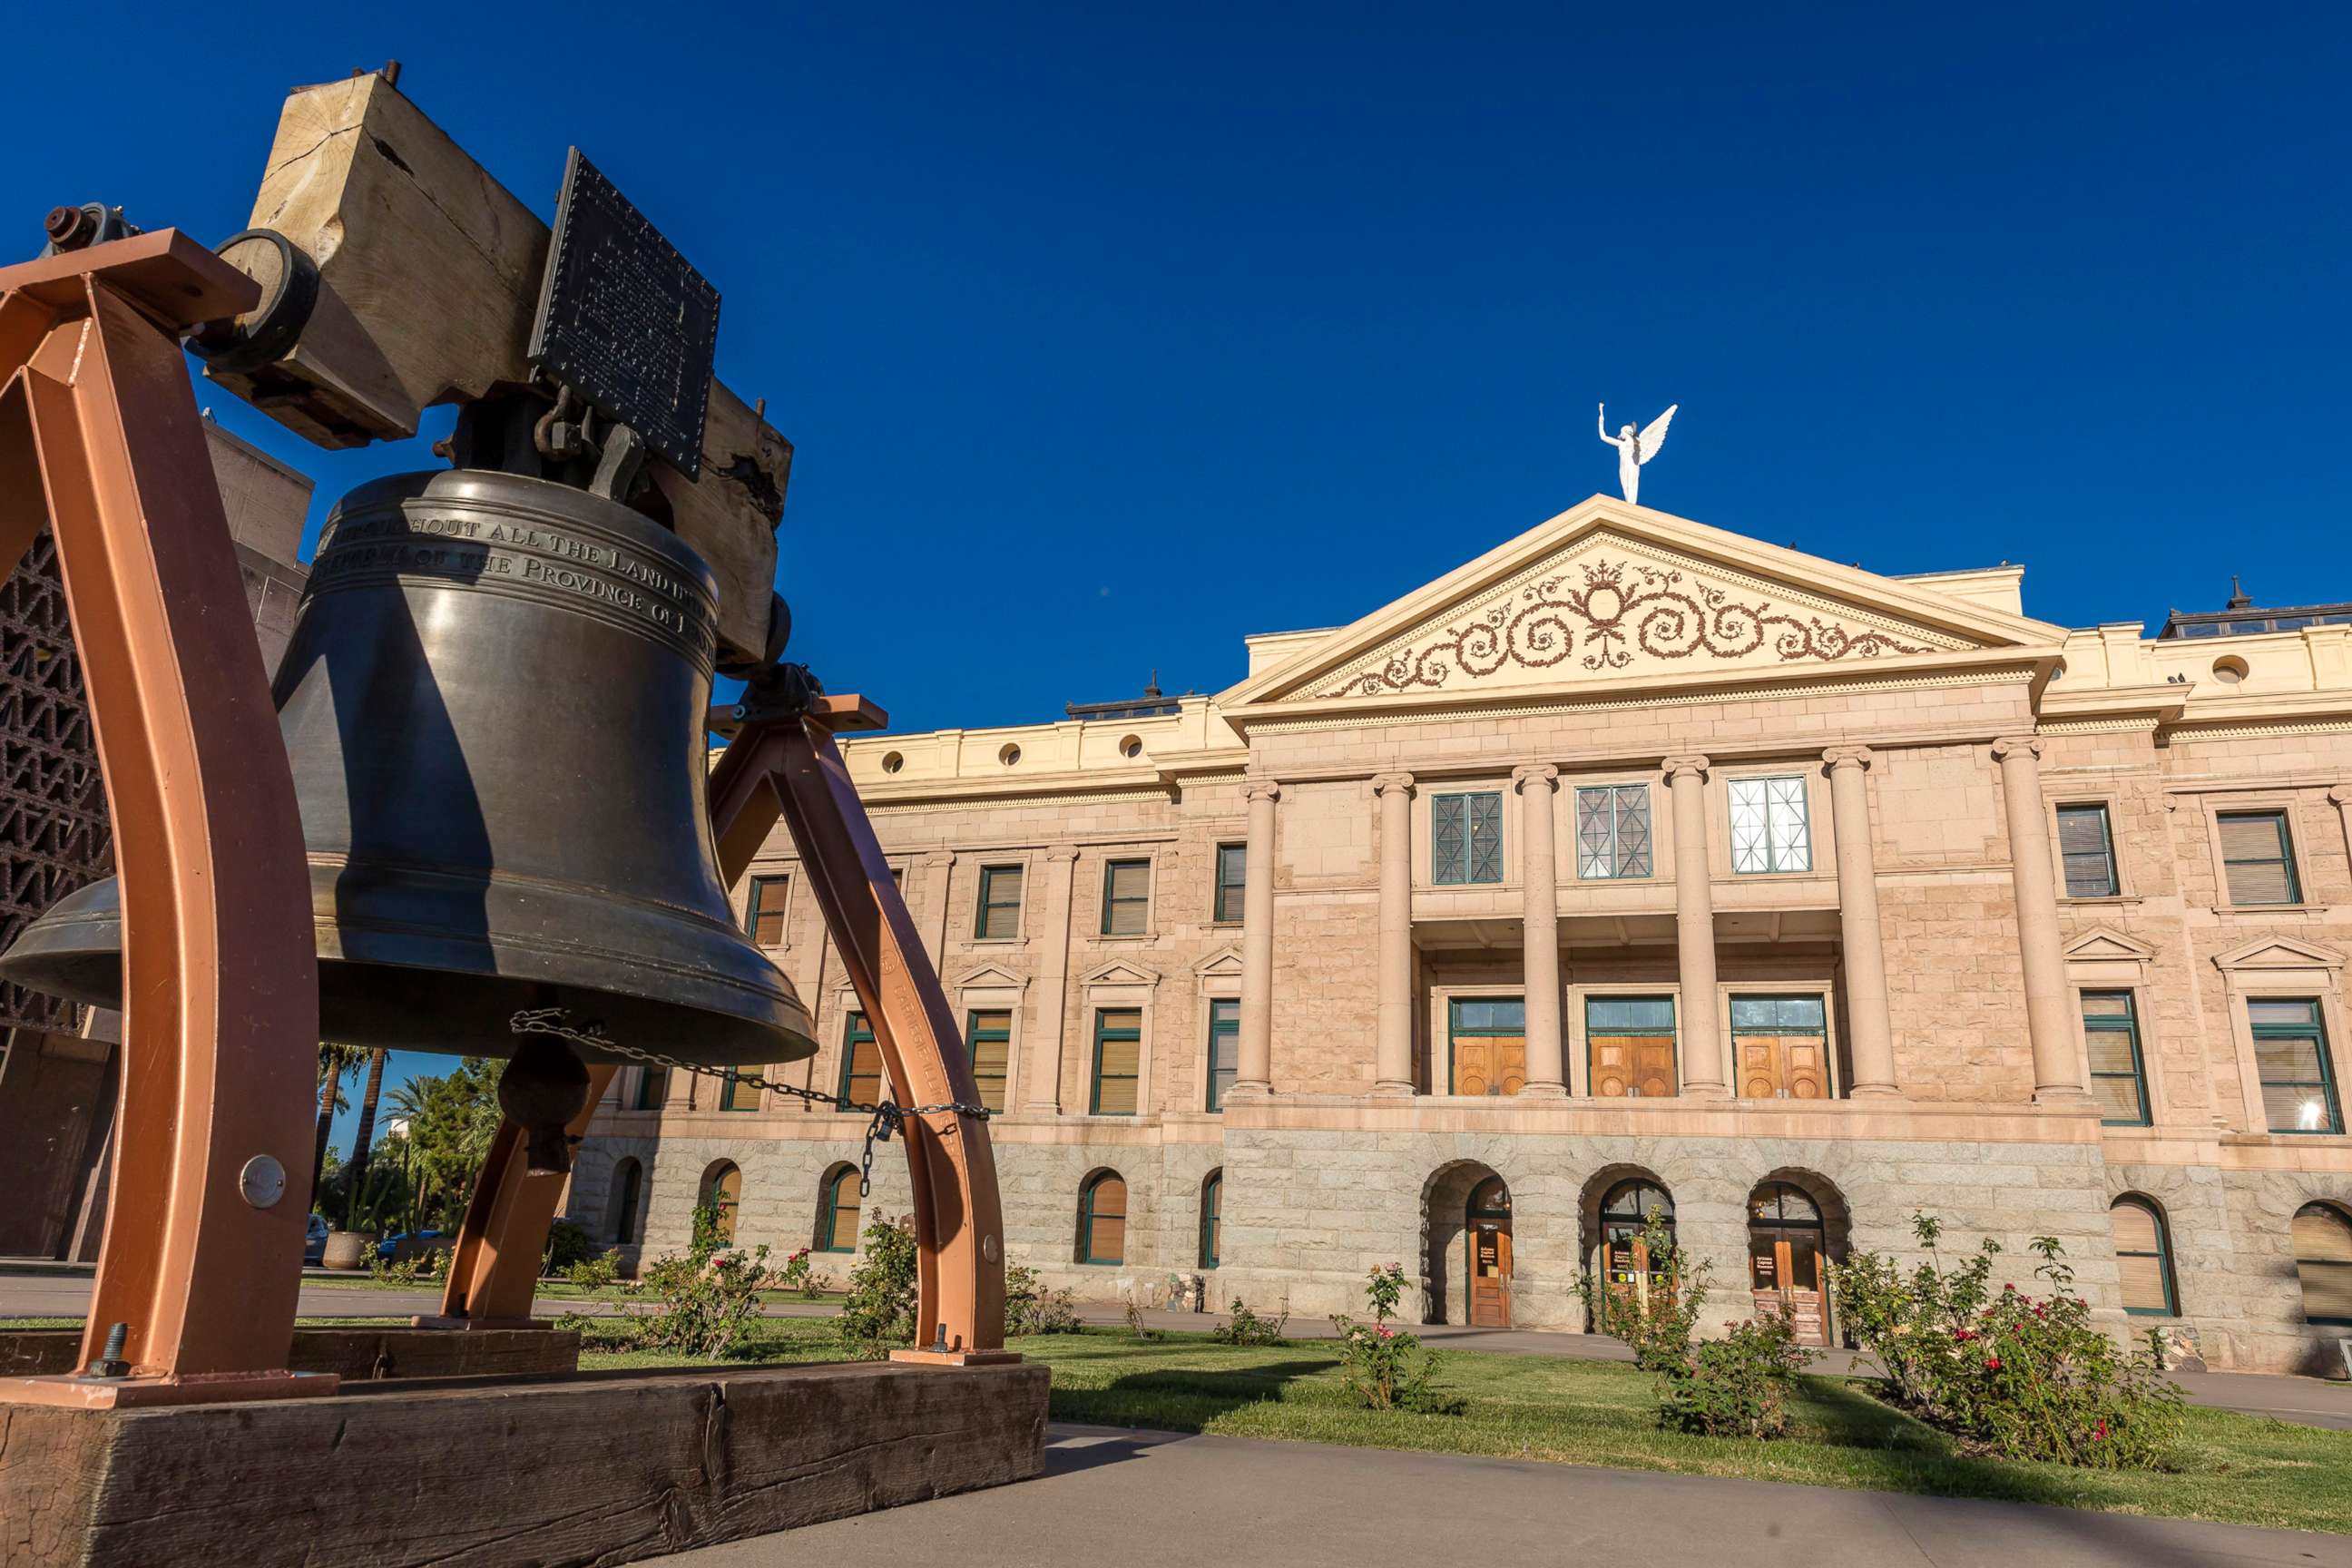 PHOTO: A replica of the Liberty Bell is shown in front of the Arizona State Capitol Building in Phoenix.